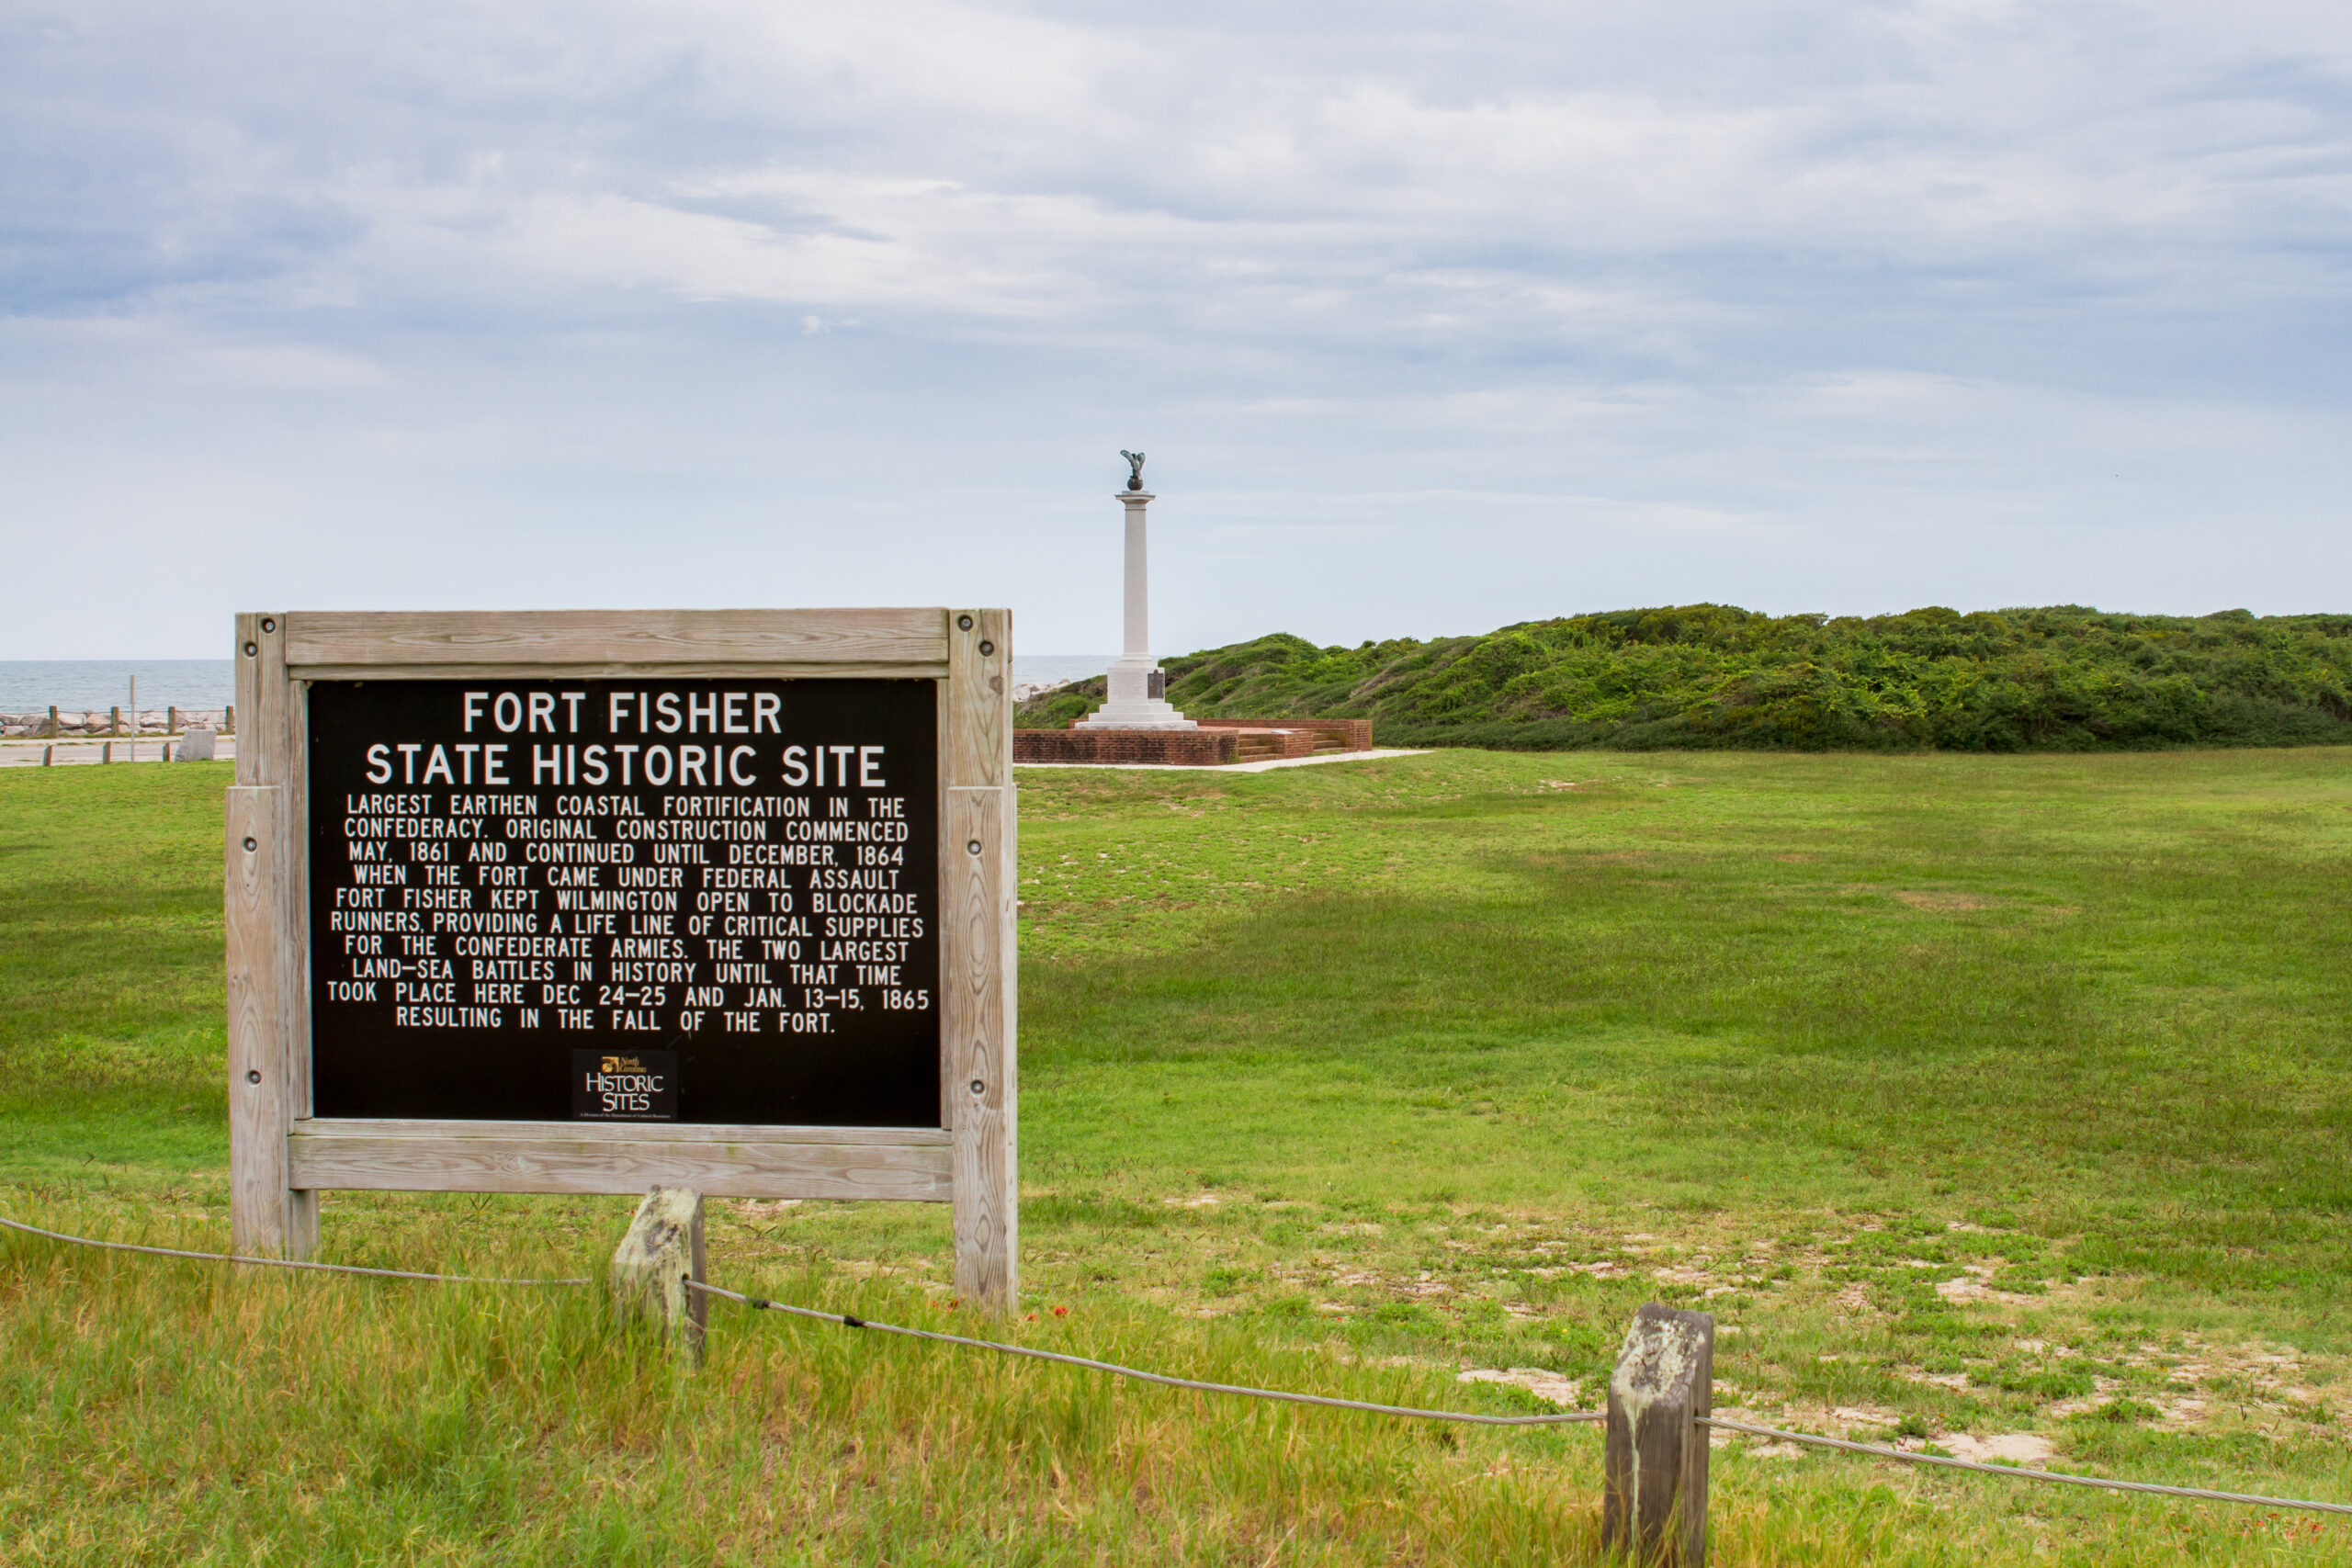 Fort Fisher State Historic Site. Credit: Kelly Verdeck/CC BY-ND 2.0.